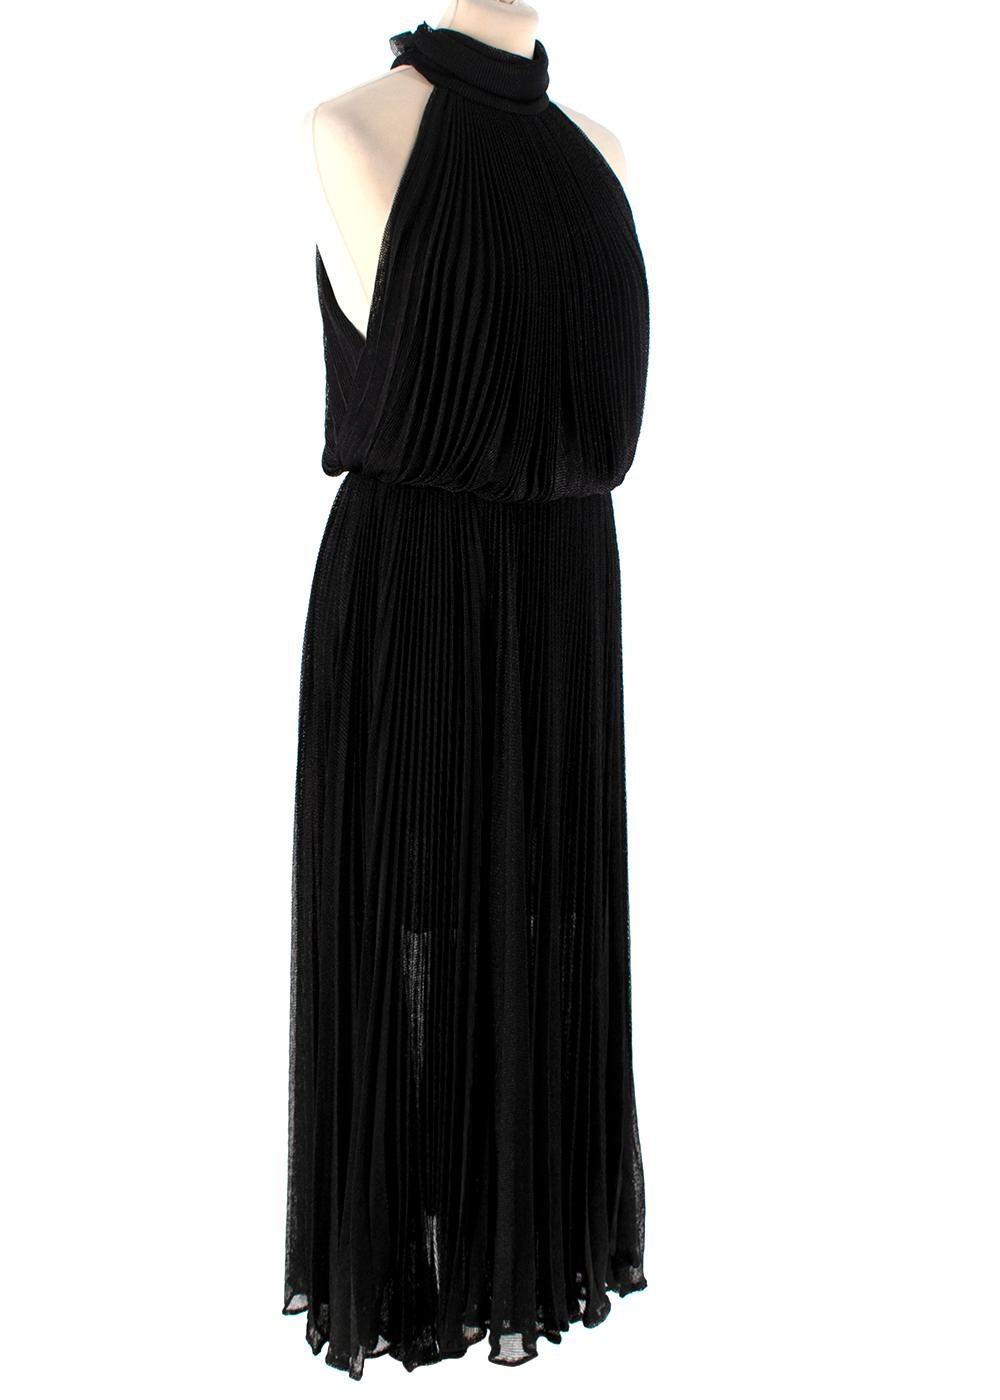 Maria Lucia Hohan Black Lurex Knit Pleated Dress

- Sleeveless
- High-neck
- Open back
- Button closure at the nape and concealed zip closure at the back 
- Elasticated waistband
- Fully lined

Materials:
59% Viscose
40% Lurex
1% Spandex

Dry clean